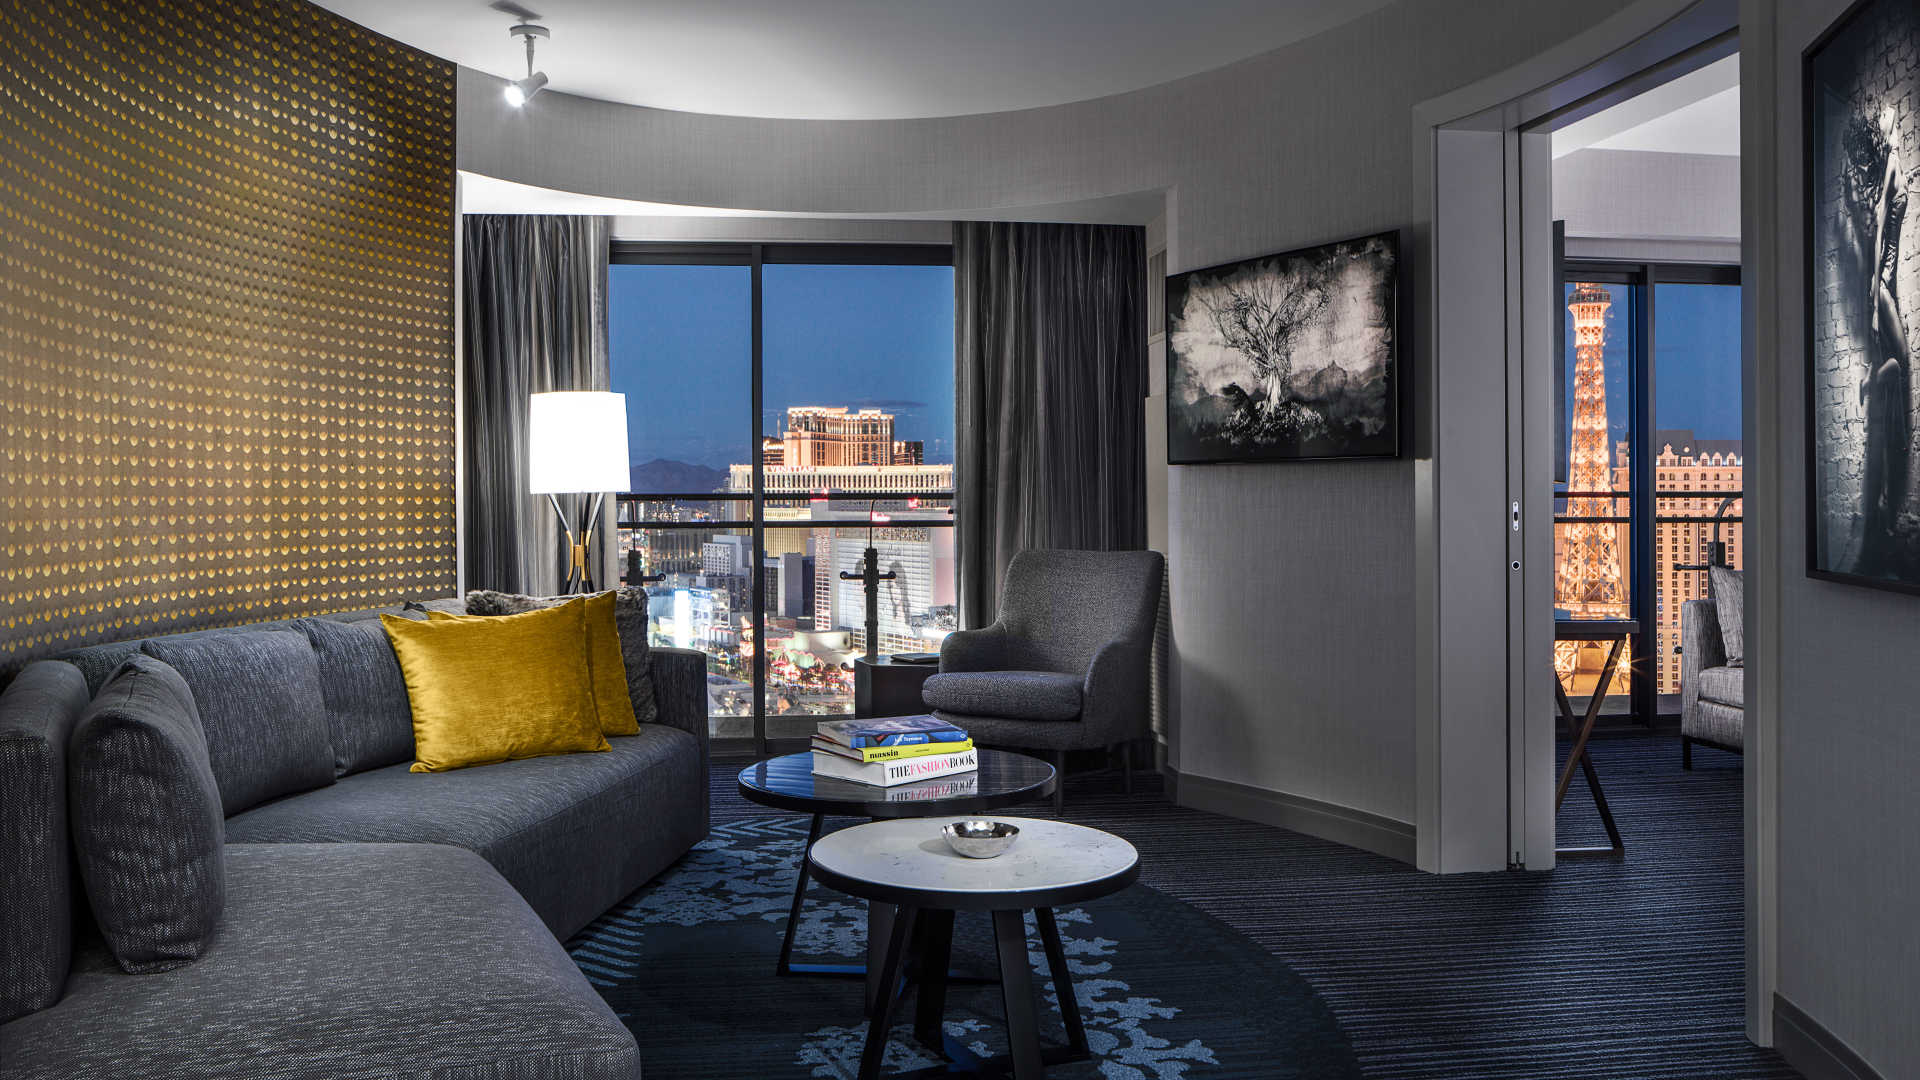 Las Vegas Hotels With Private Balconies | 2018 World's ...